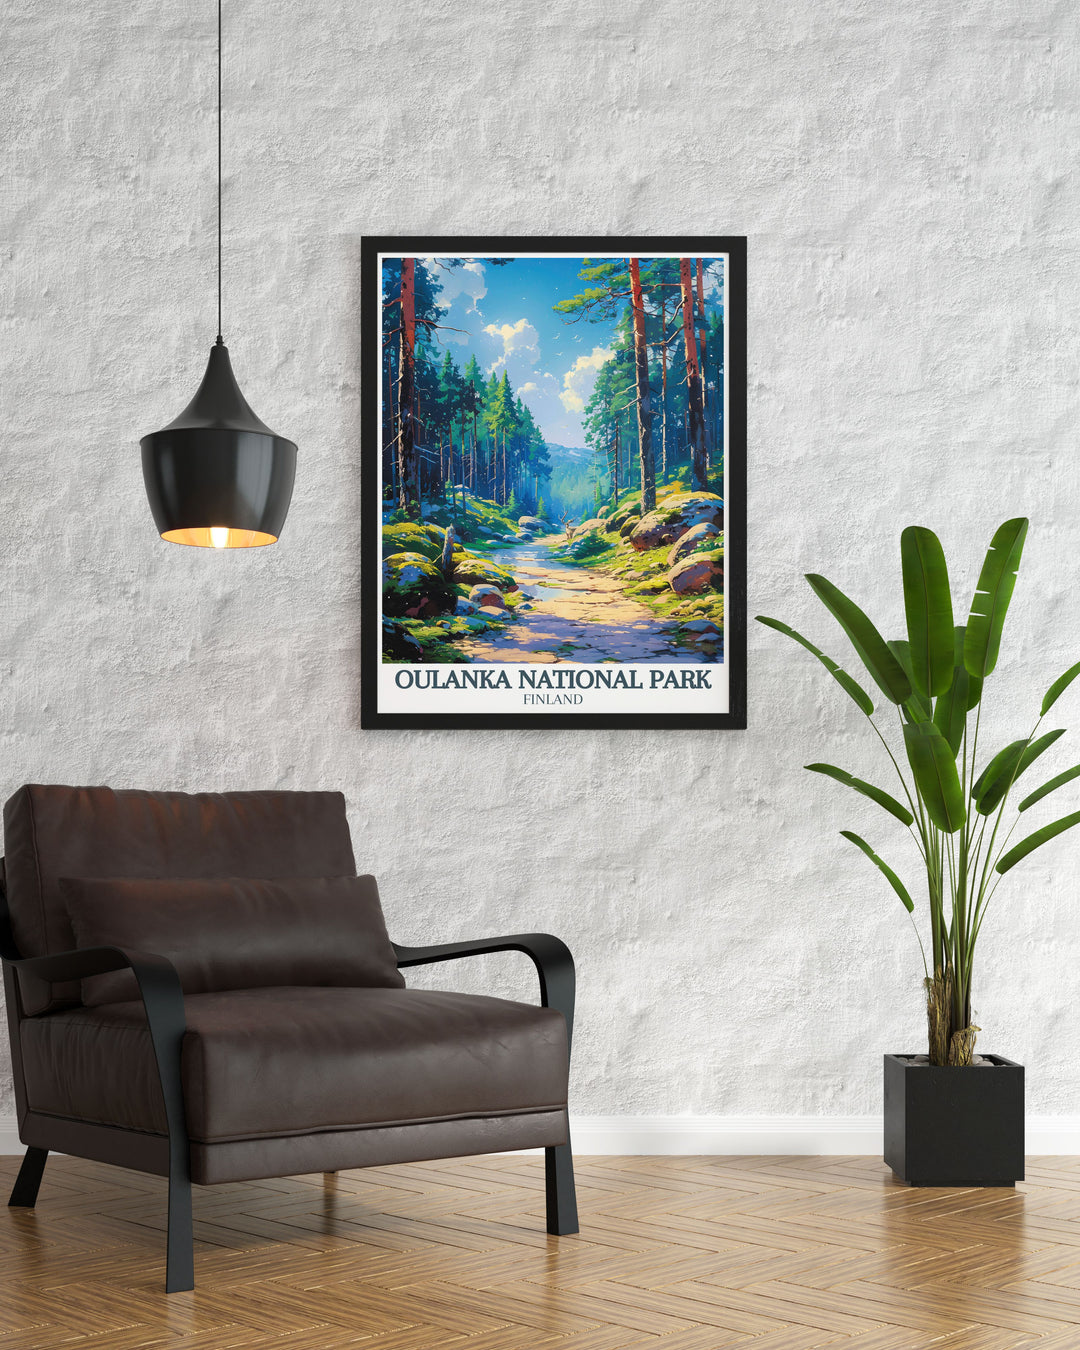 Elegant framed print of Oulanka river Kiutakongas Rapids. Perfect for nature wall art and home decoration. This national park poster is a beautiful representation of Finlands wilderness and makes a great gift for any occasion.